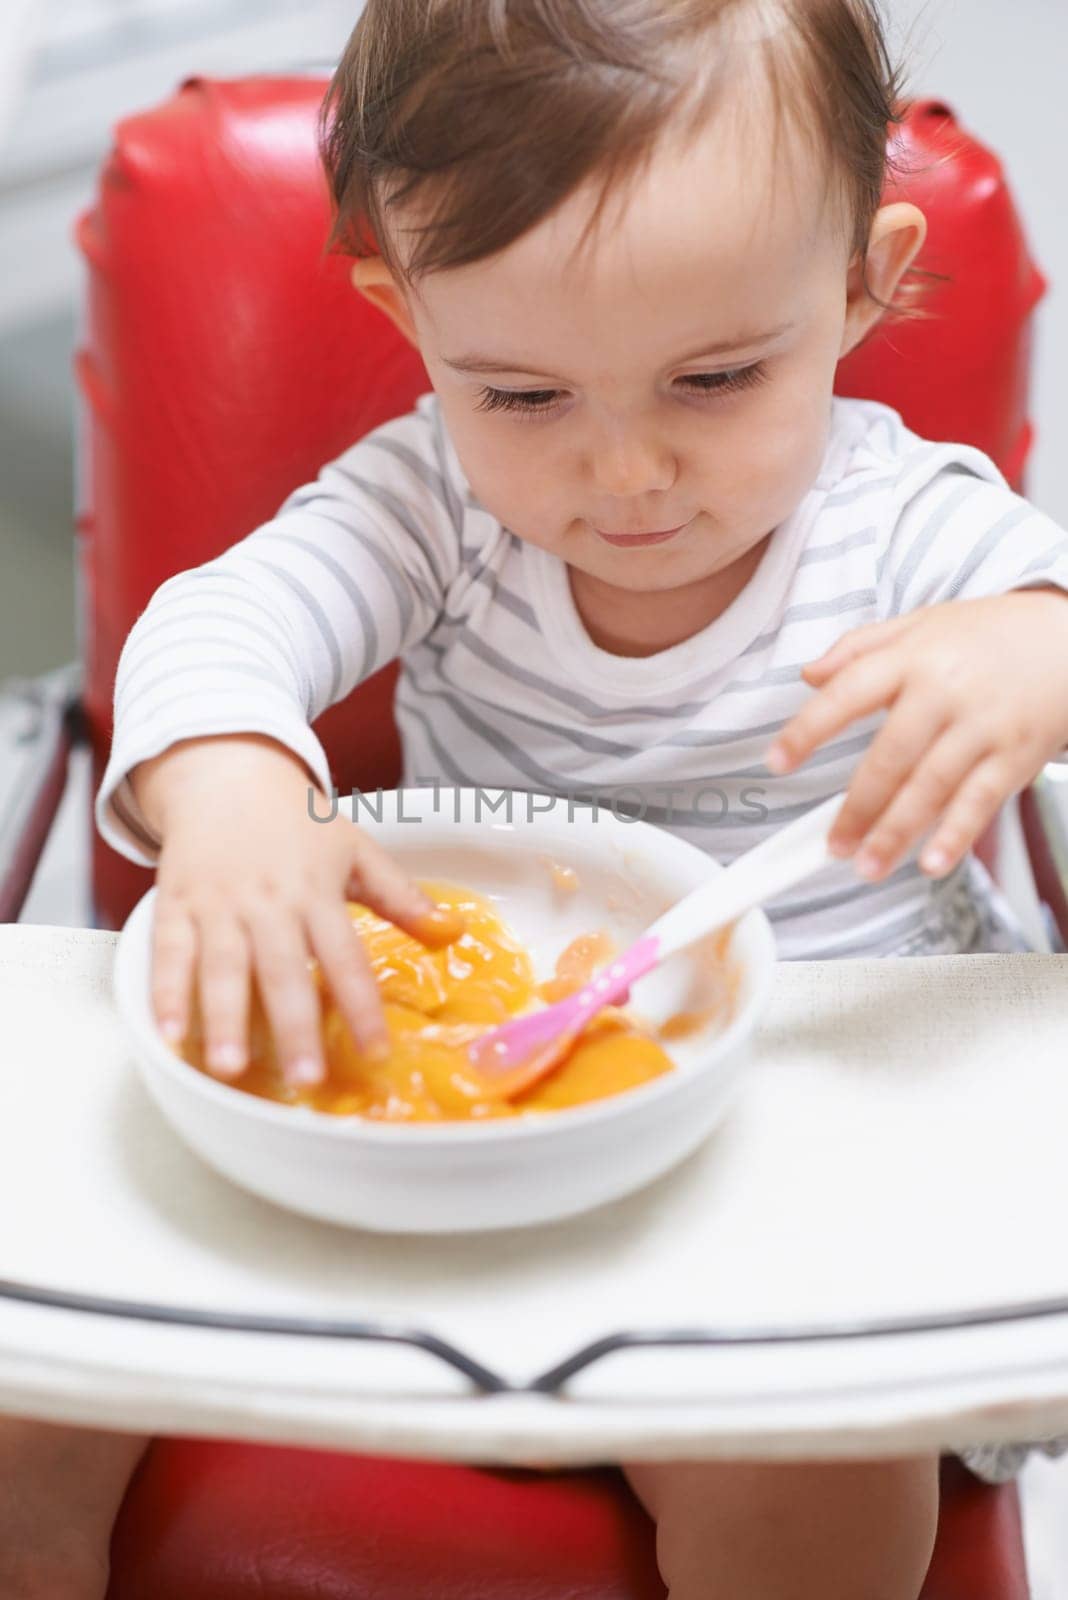 Baby, high chair and eating food in bowl for meal, nutrition or healthy porridge at home. Young, cute and adorable little child, kid or toddler playing with snack for hunger, vitamins or nutrients.